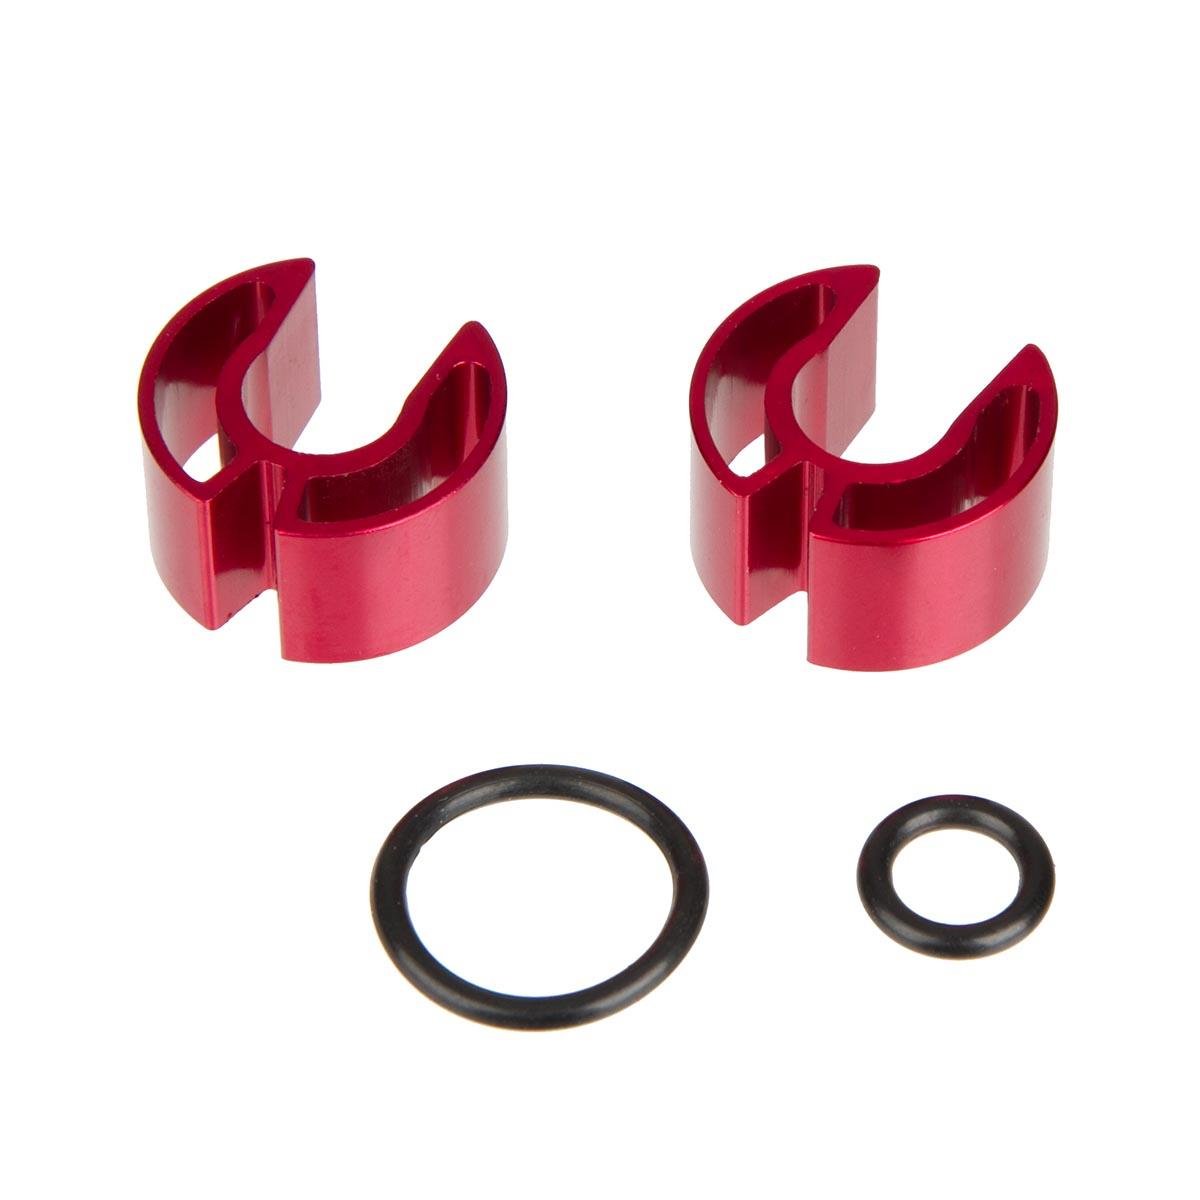 Cane Creek Travel Reduction Kit Helm 2 x 10 mm Spacer